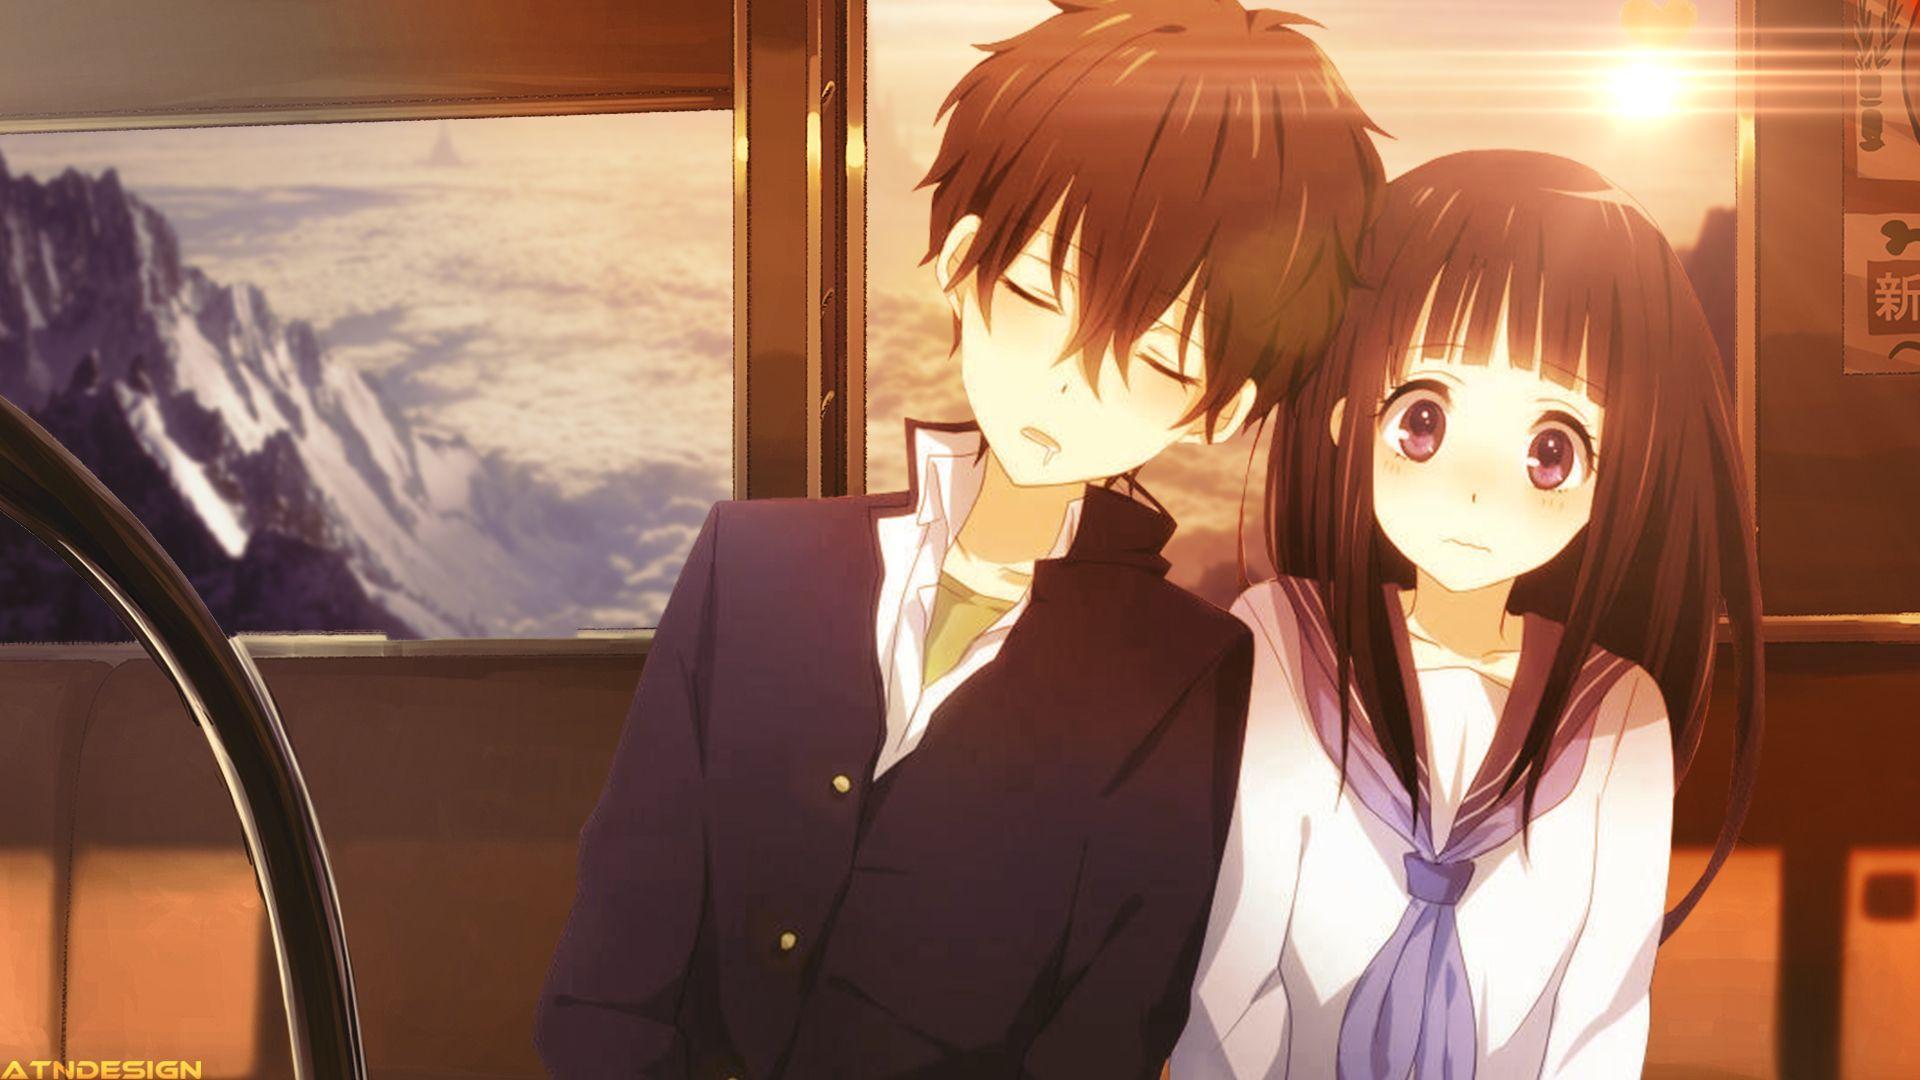 Couples Anime Wallpapers Wallpaper Cave